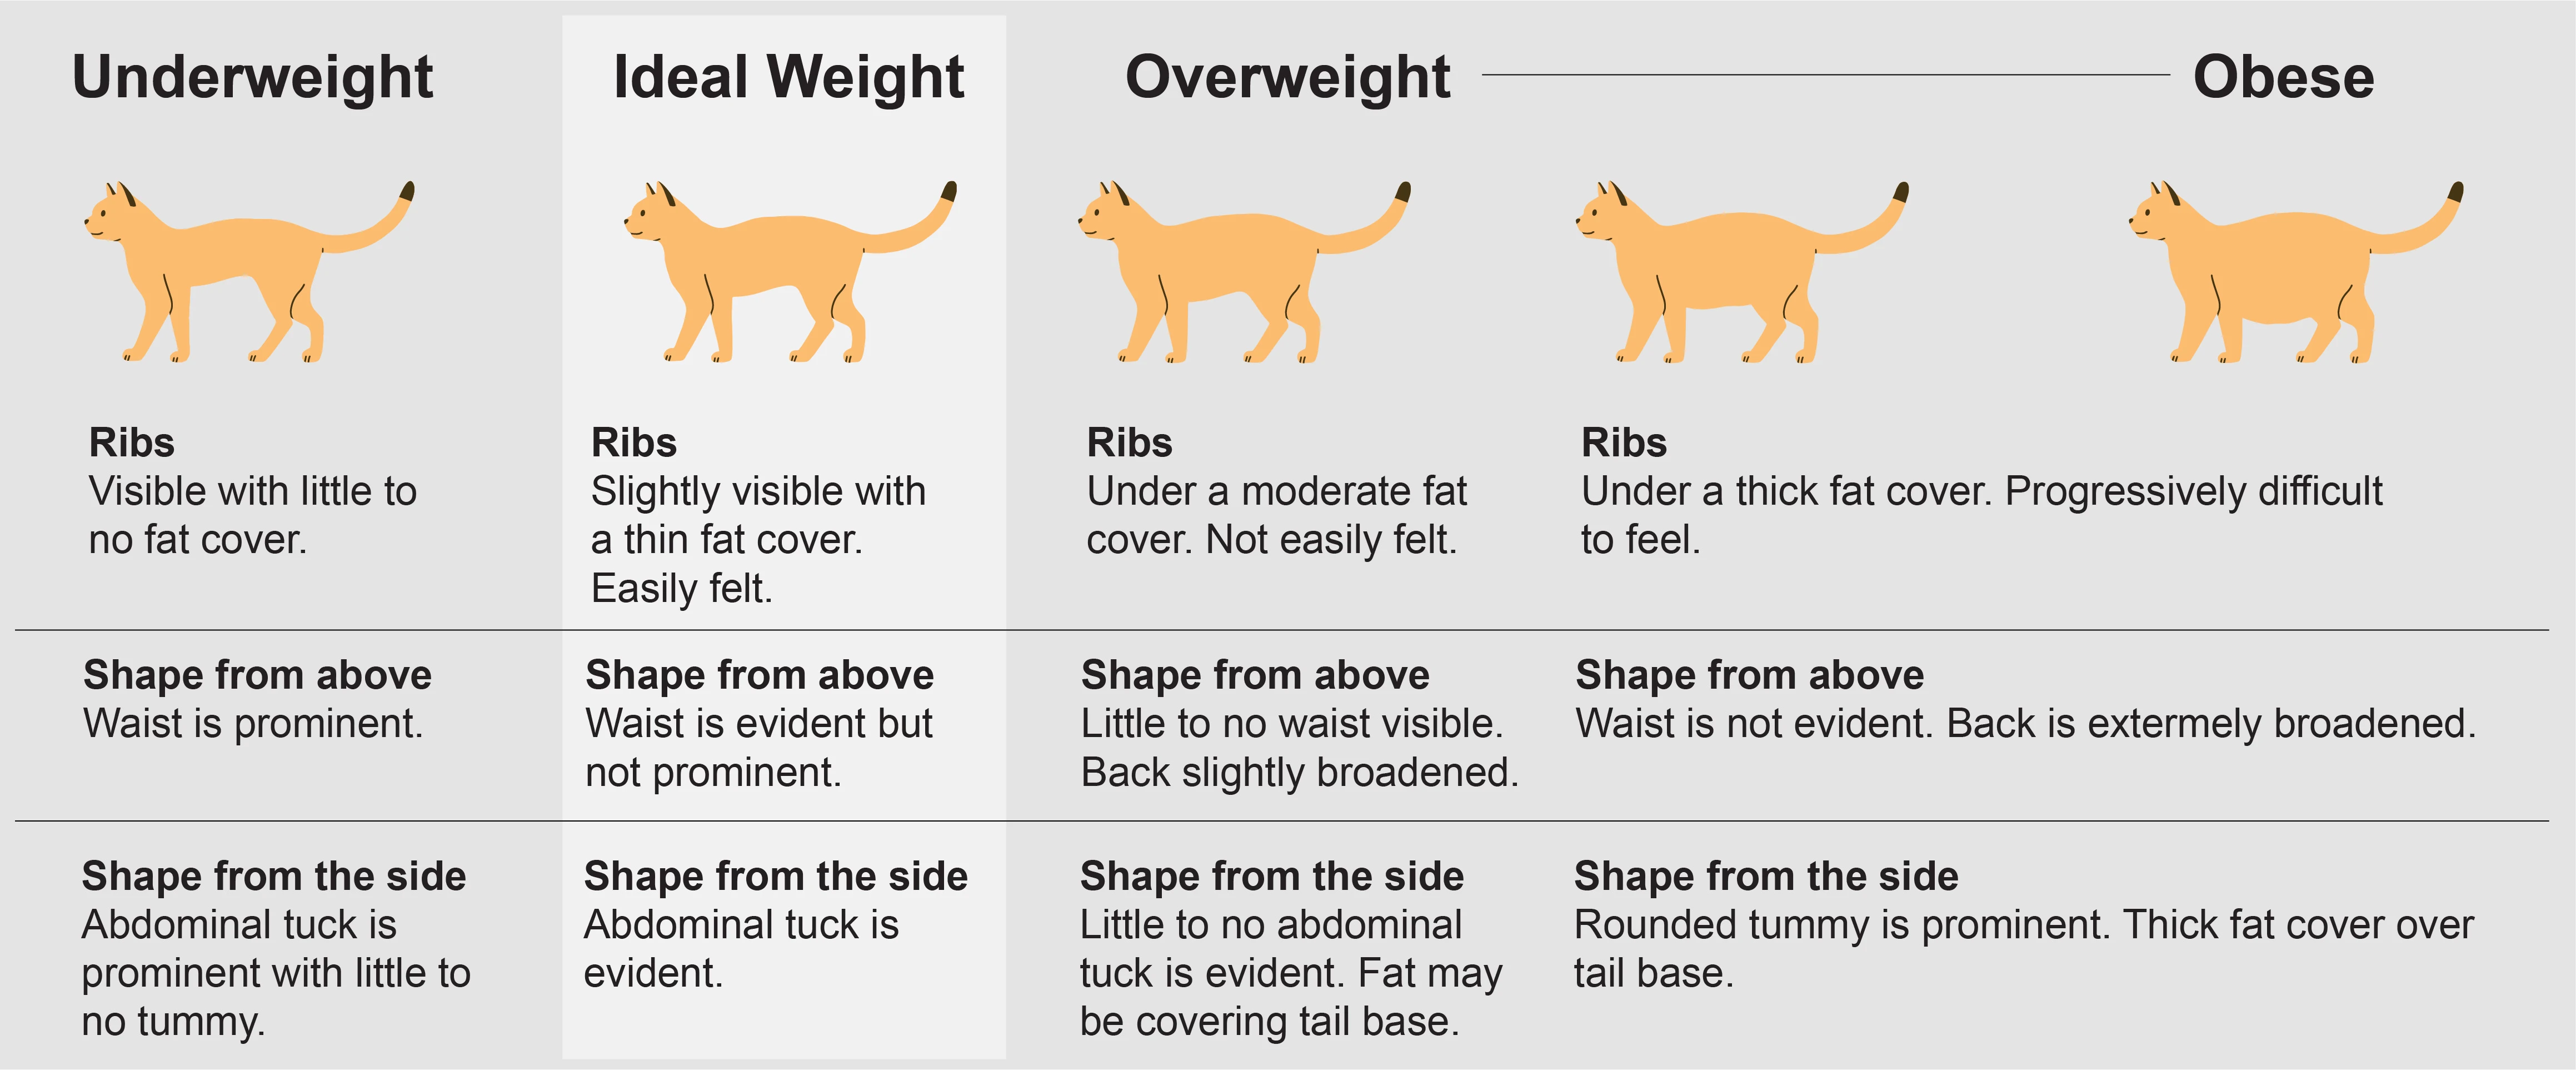 Average Cat Weight: How Heavy Should Your Cat Be?